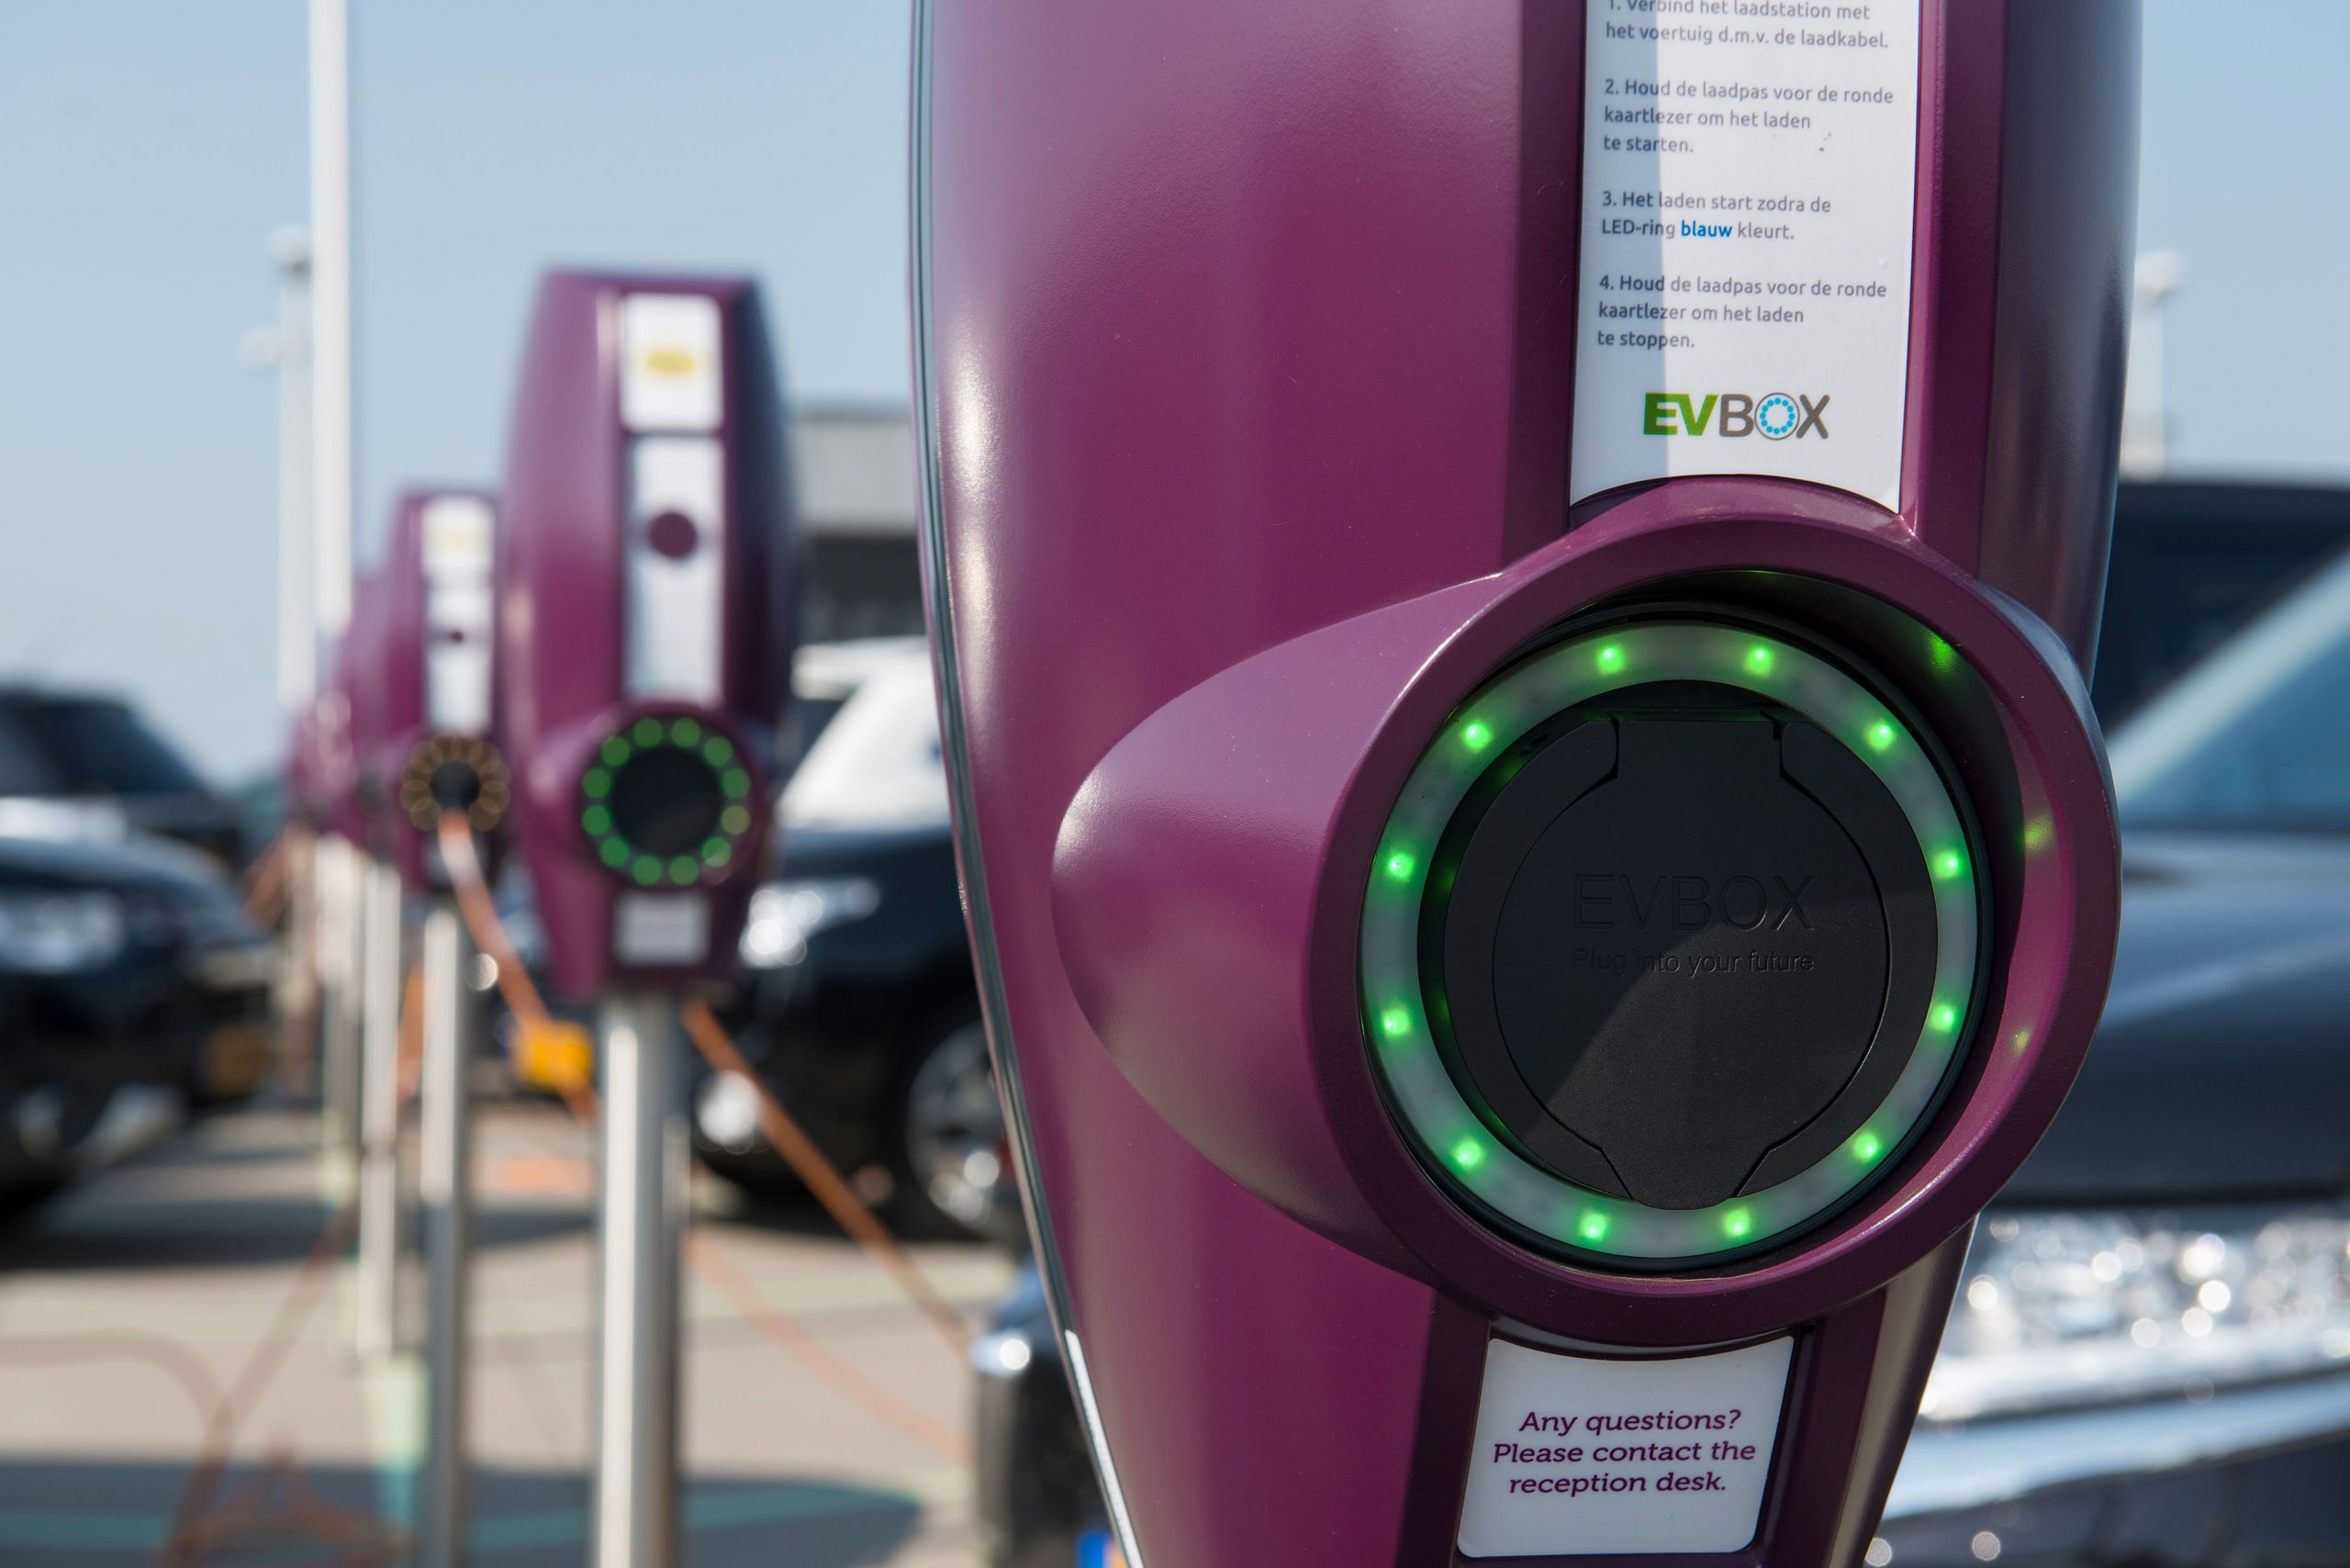 Up to €600 grant for an Electric Vehicle charger